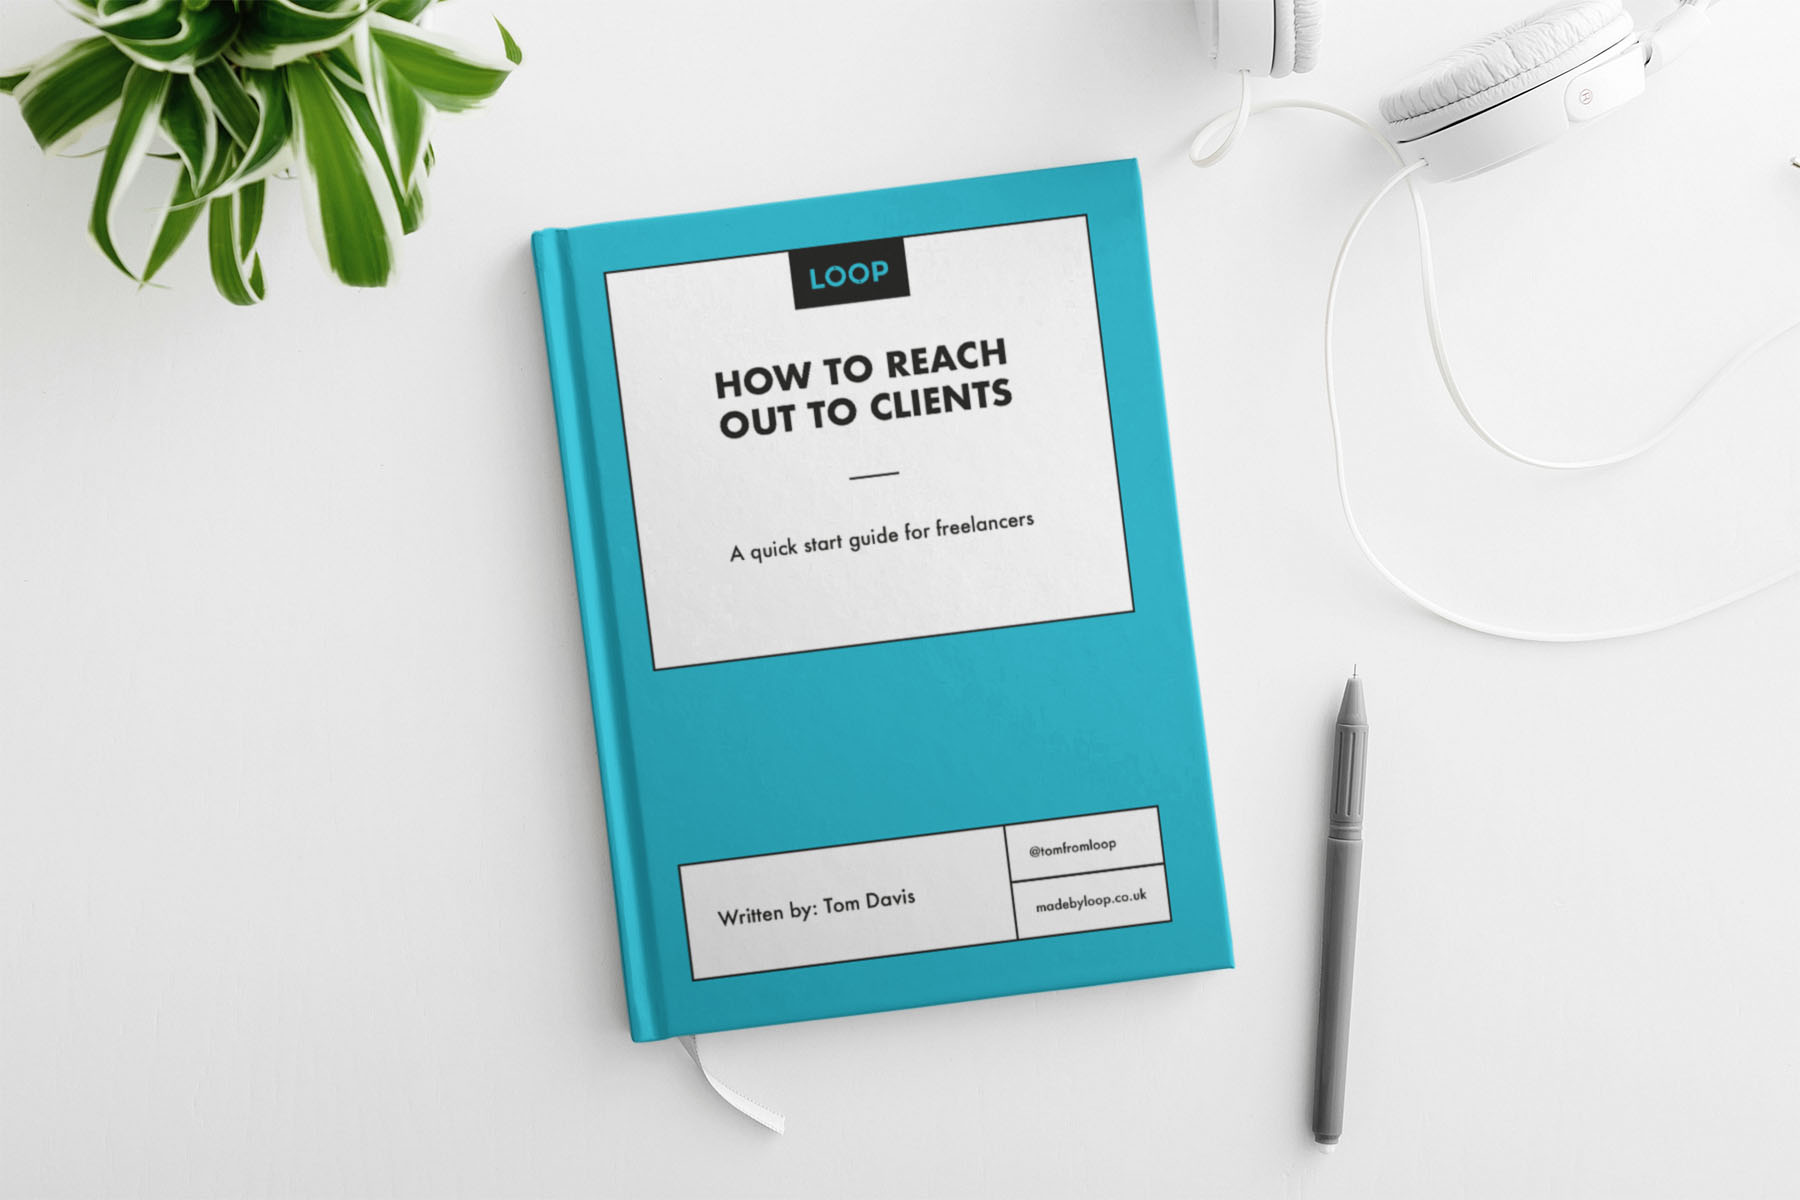 How to reach out to clients